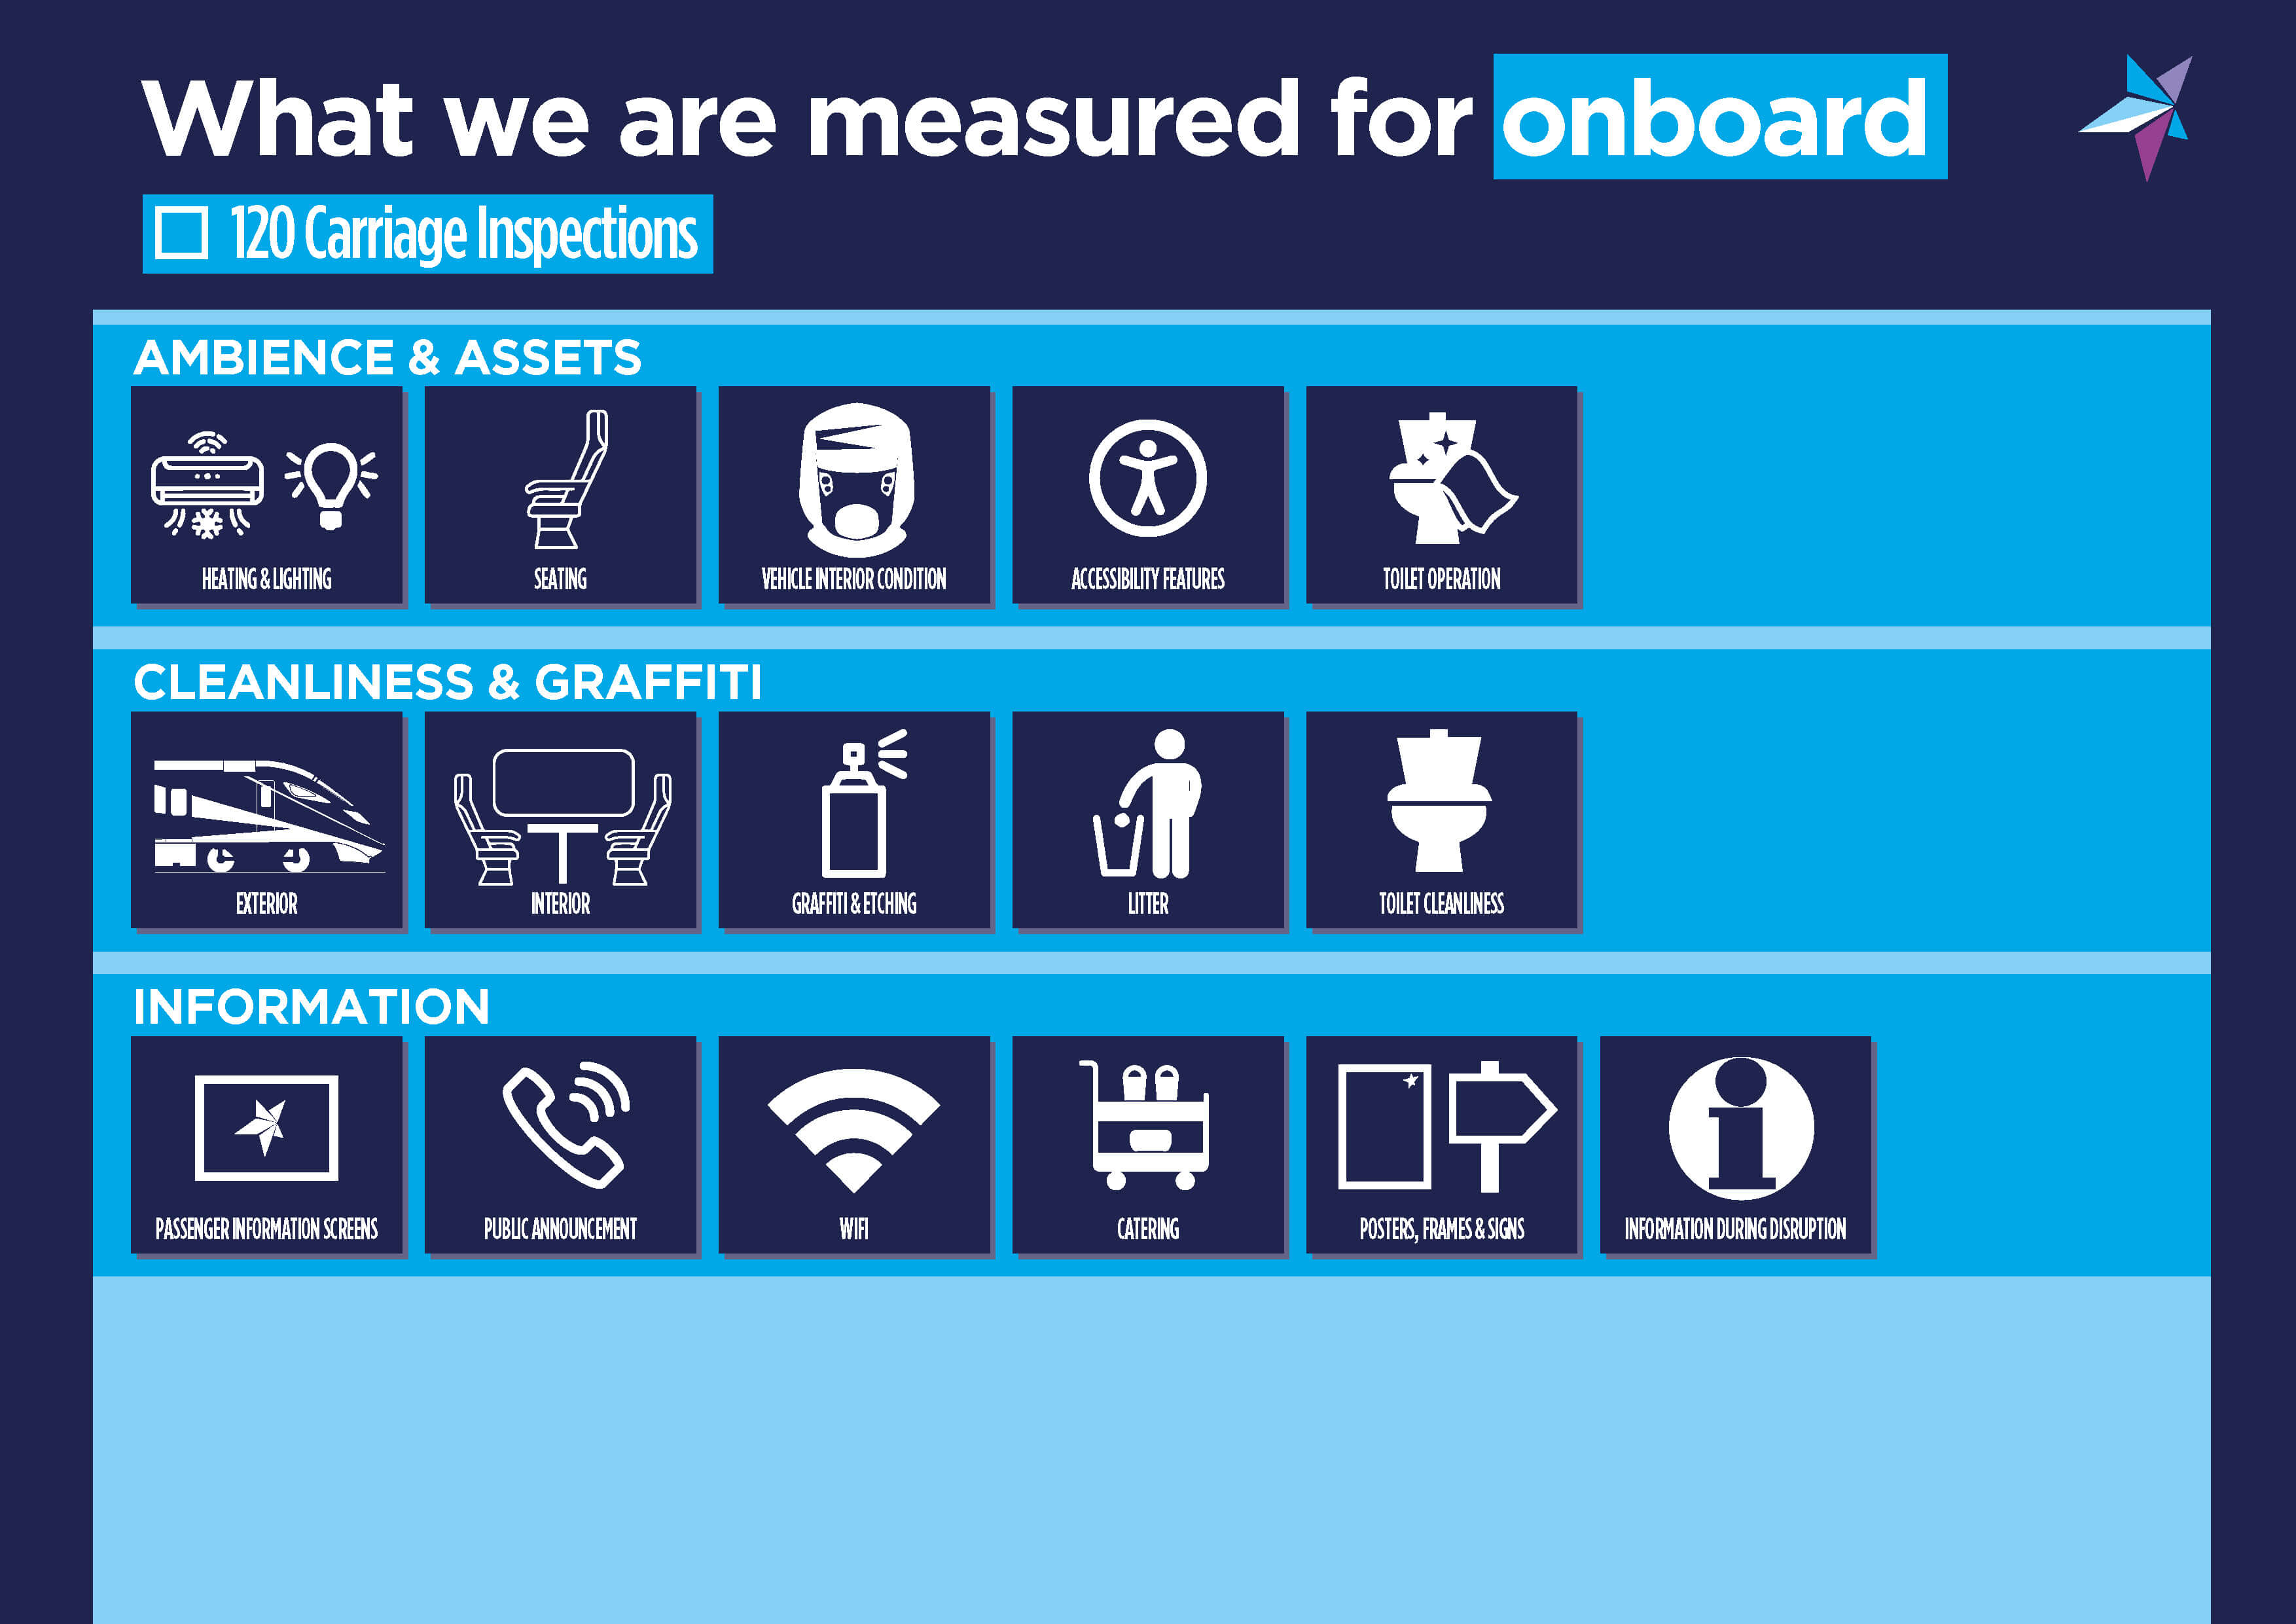 An infographic explaining what services we're measured for during onboard inspections. This includes ambience, assets, cleanliness, graffiti and information.